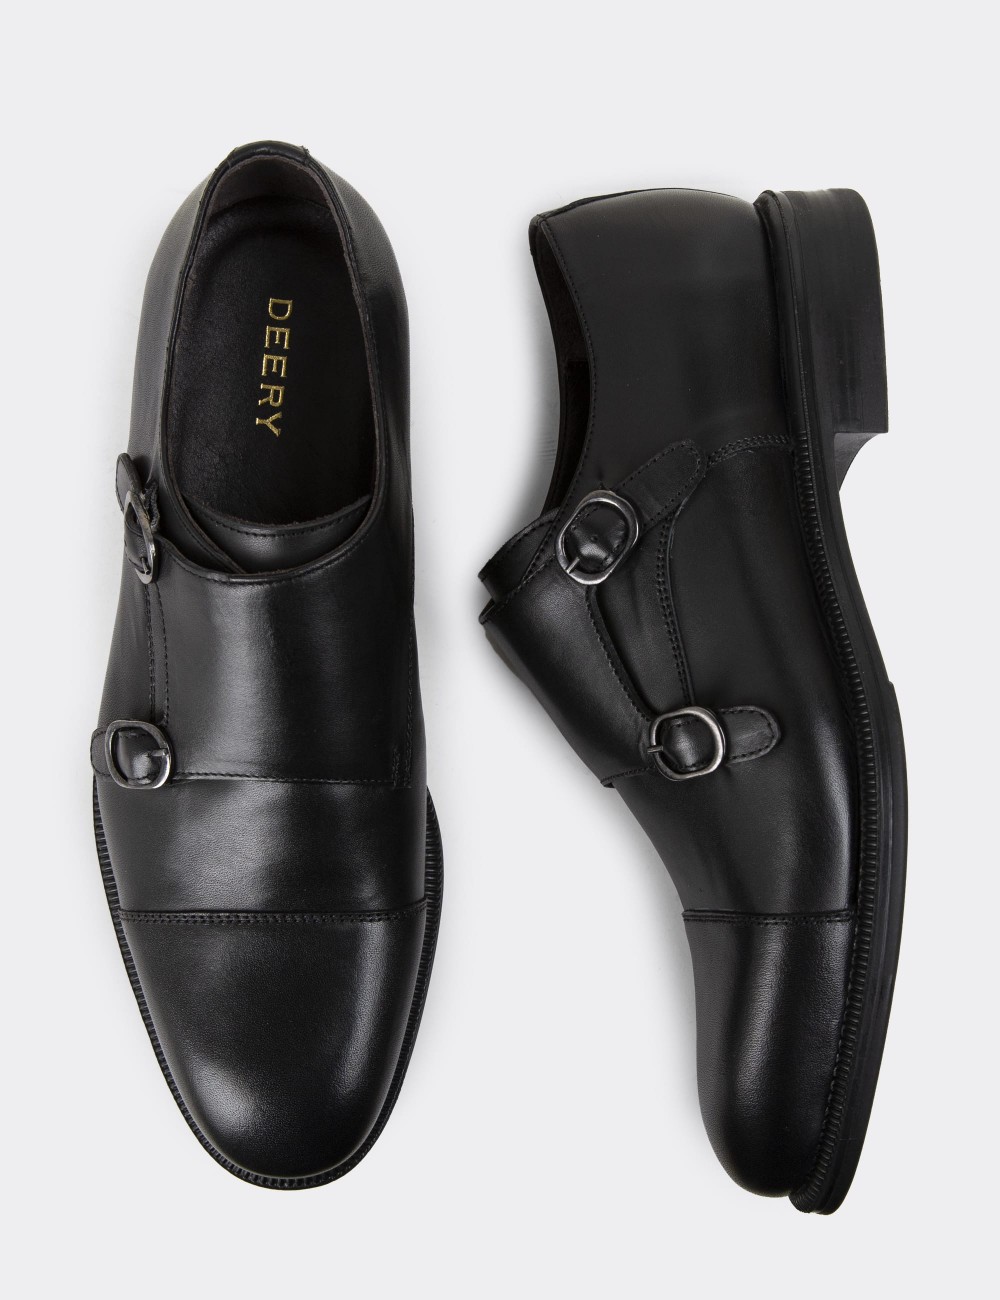 Black Leather Double Monk-Strap Classic Shoes - 01838MSYHC01